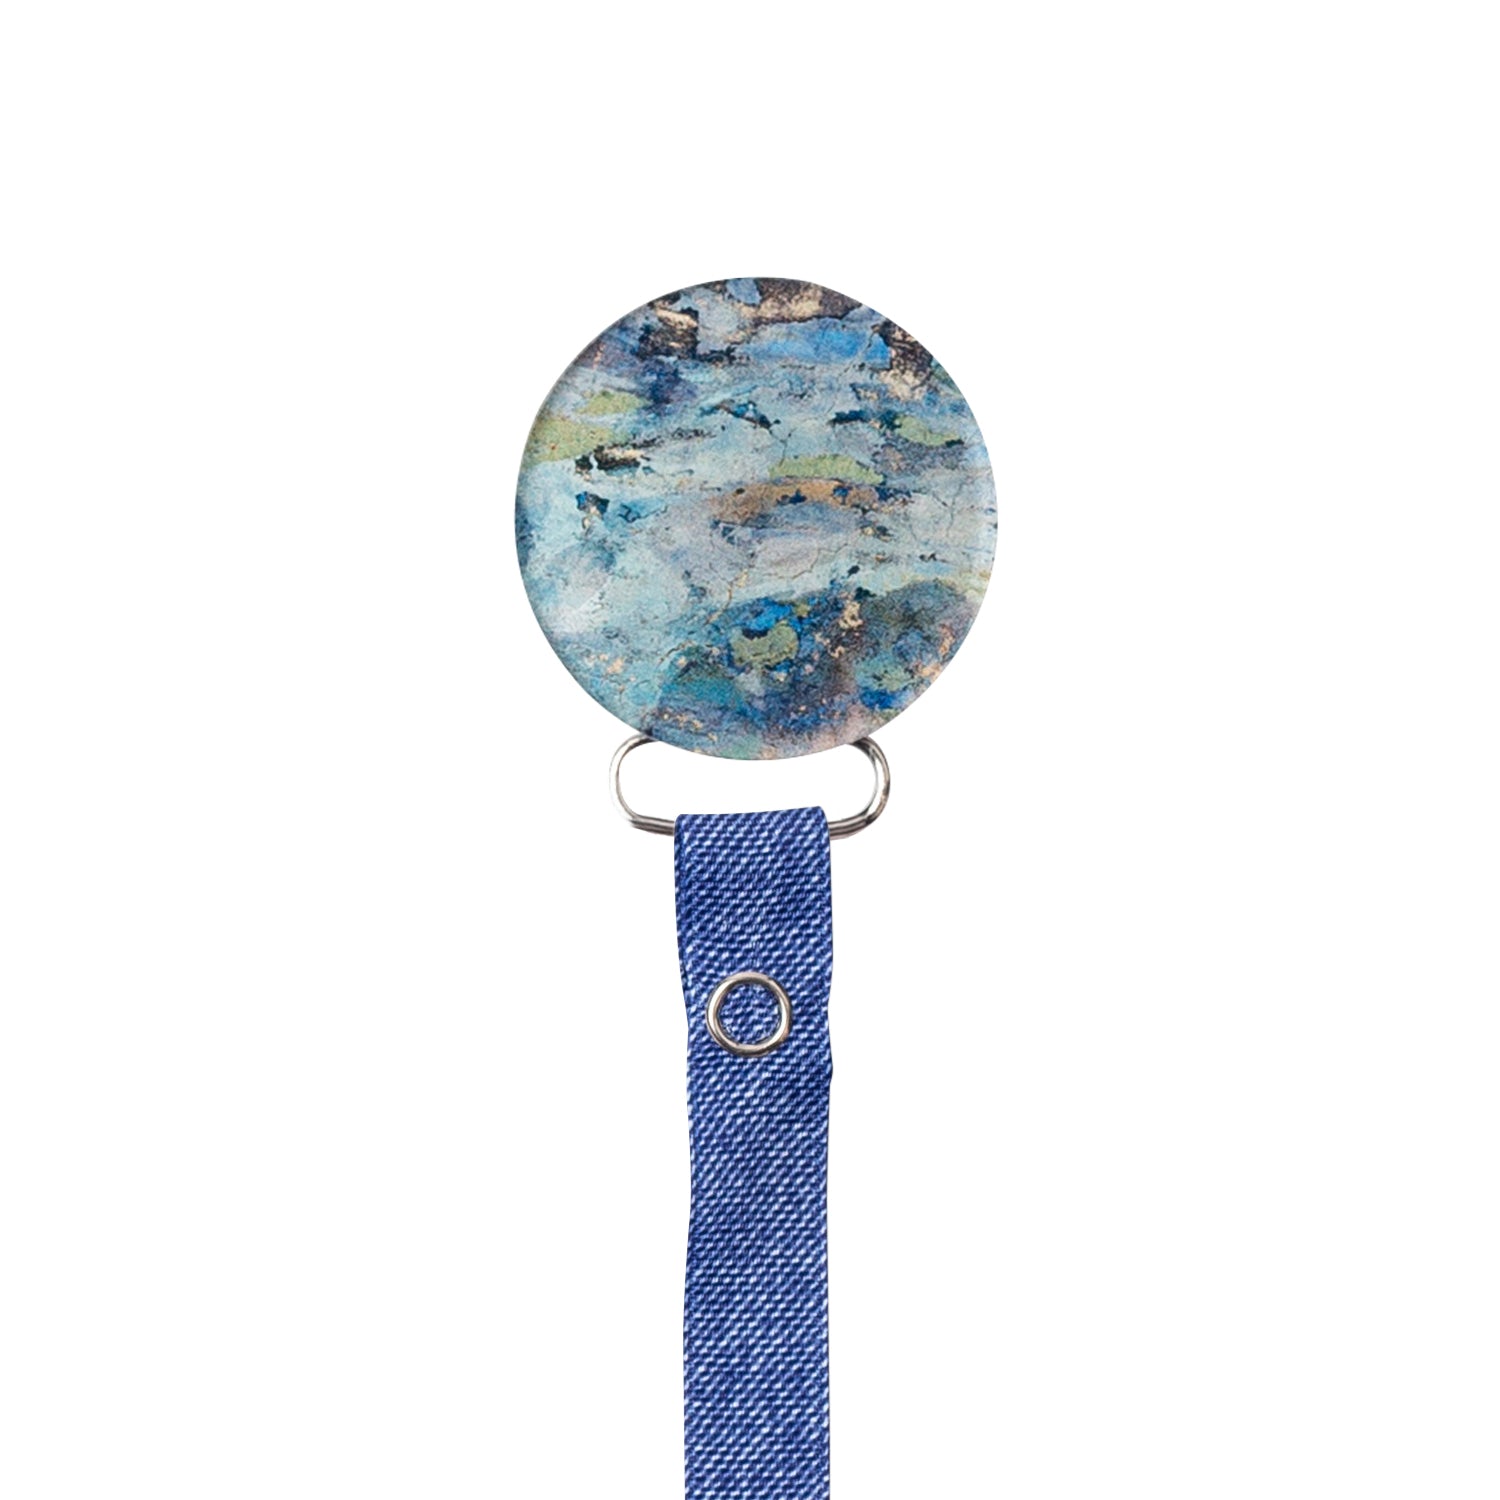 Classy Paci Painted look circle blue/ navy/ grey/ chambray baby boy pacifier clip